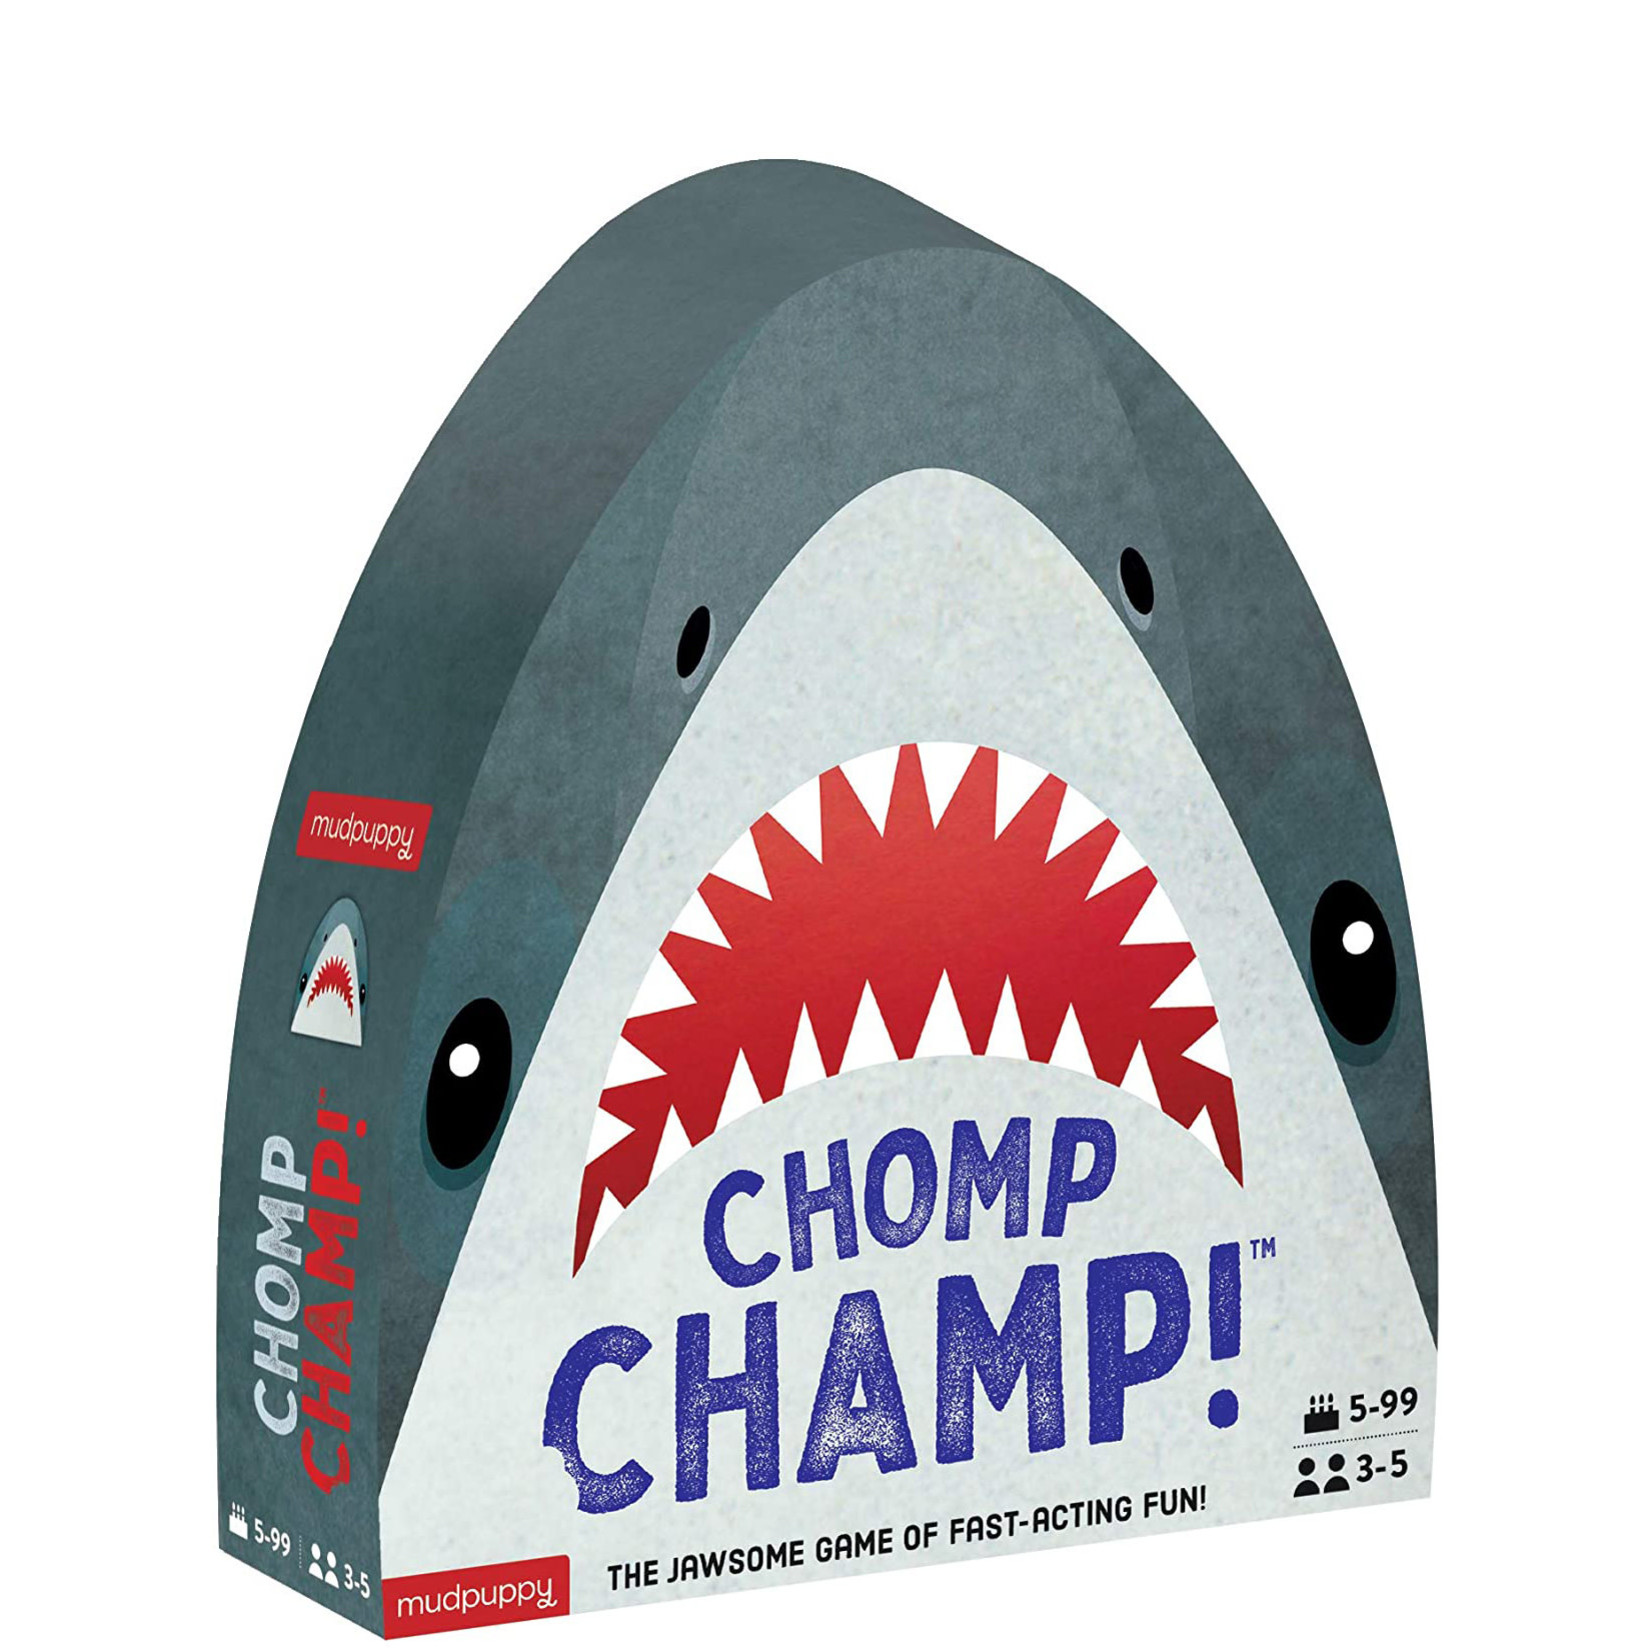 CHRONICLE BOOKS Chomp Champ!: The Jawsome Game of Fast-Acting Fun!